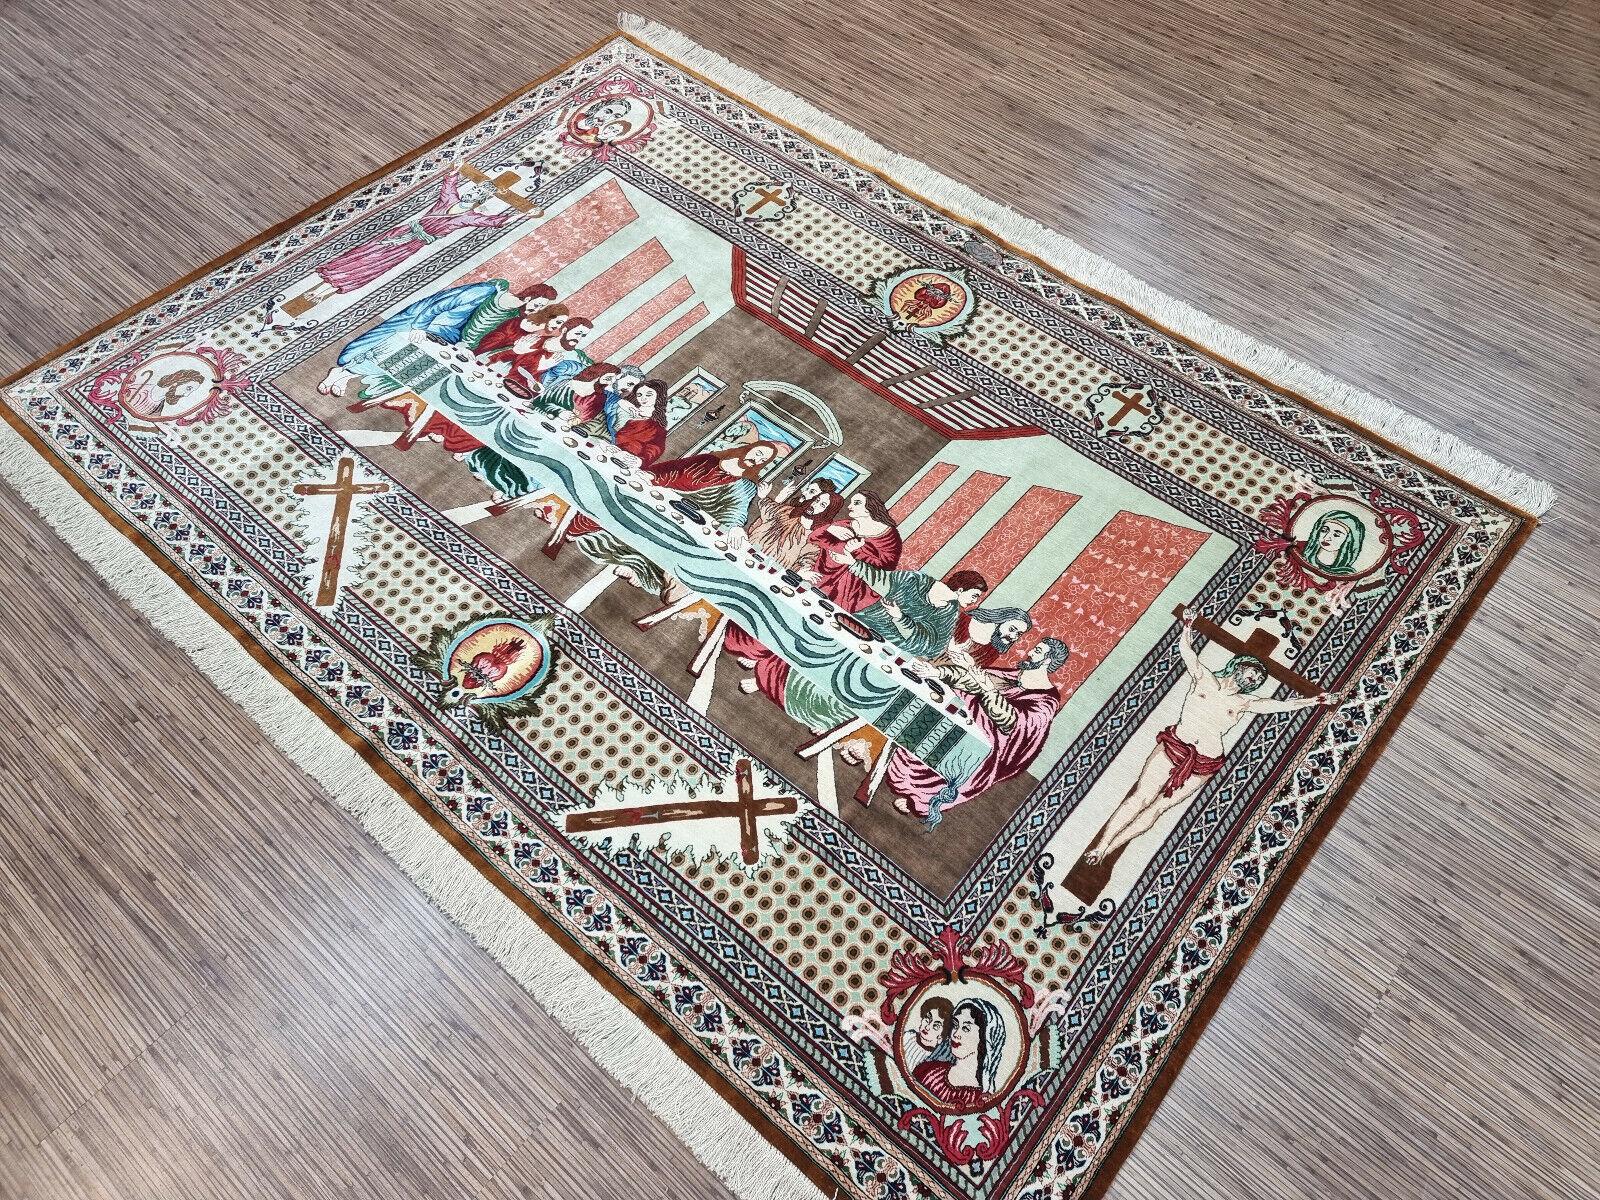 Handmade Vintage Persian Style Qum Silk Rug 4.4' x 6.2', 1970s - 1D81 In Good Condition For Sale In Bordeaux, FR